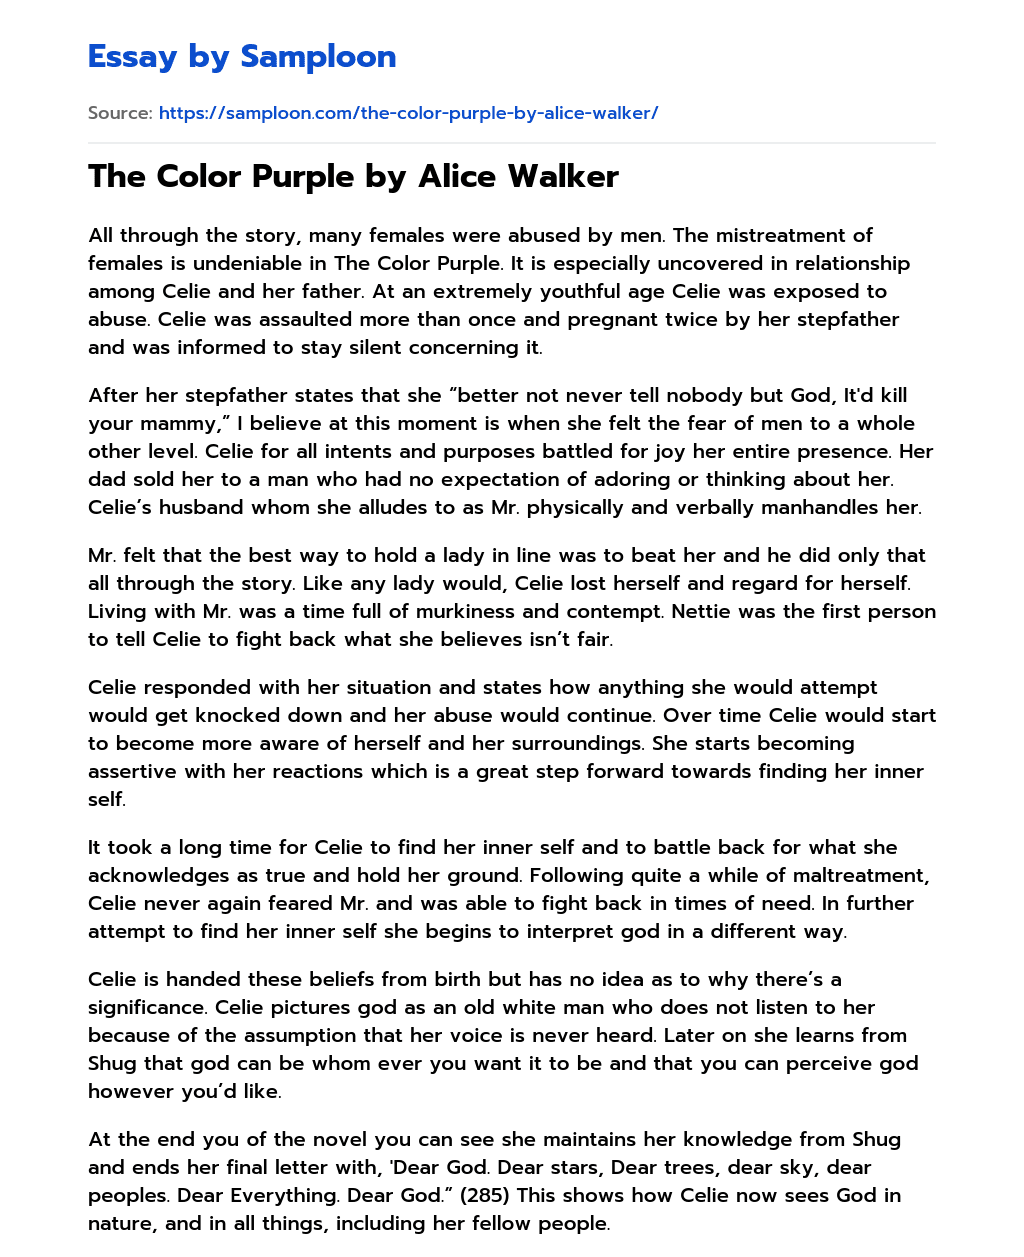 analytical essay about the color purple